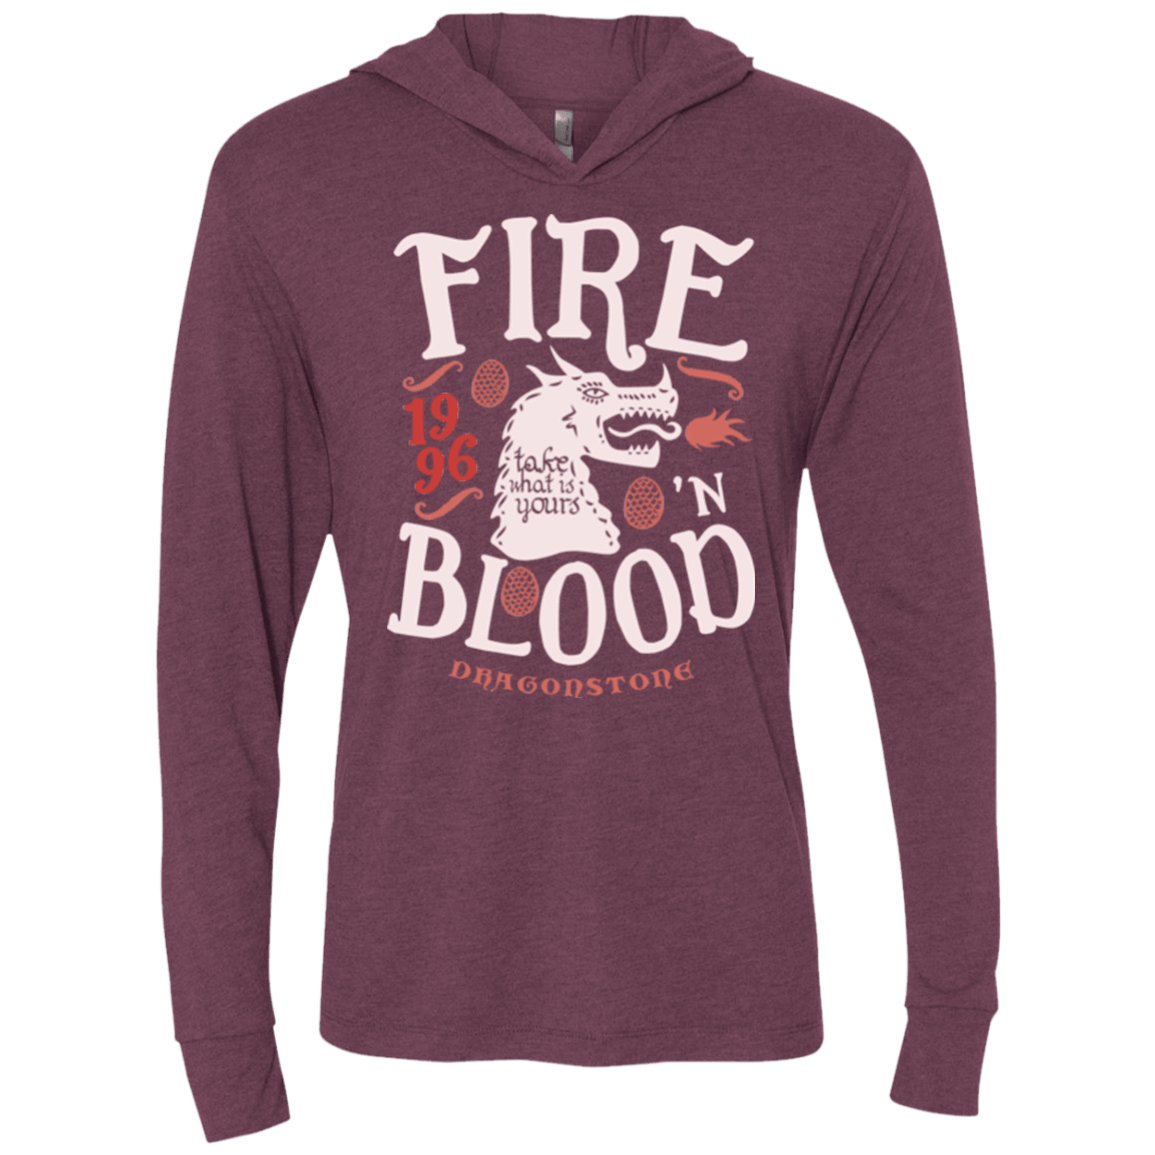 T-Shirts House of Dragons Triblend Long Sleeve Hoodie Tee